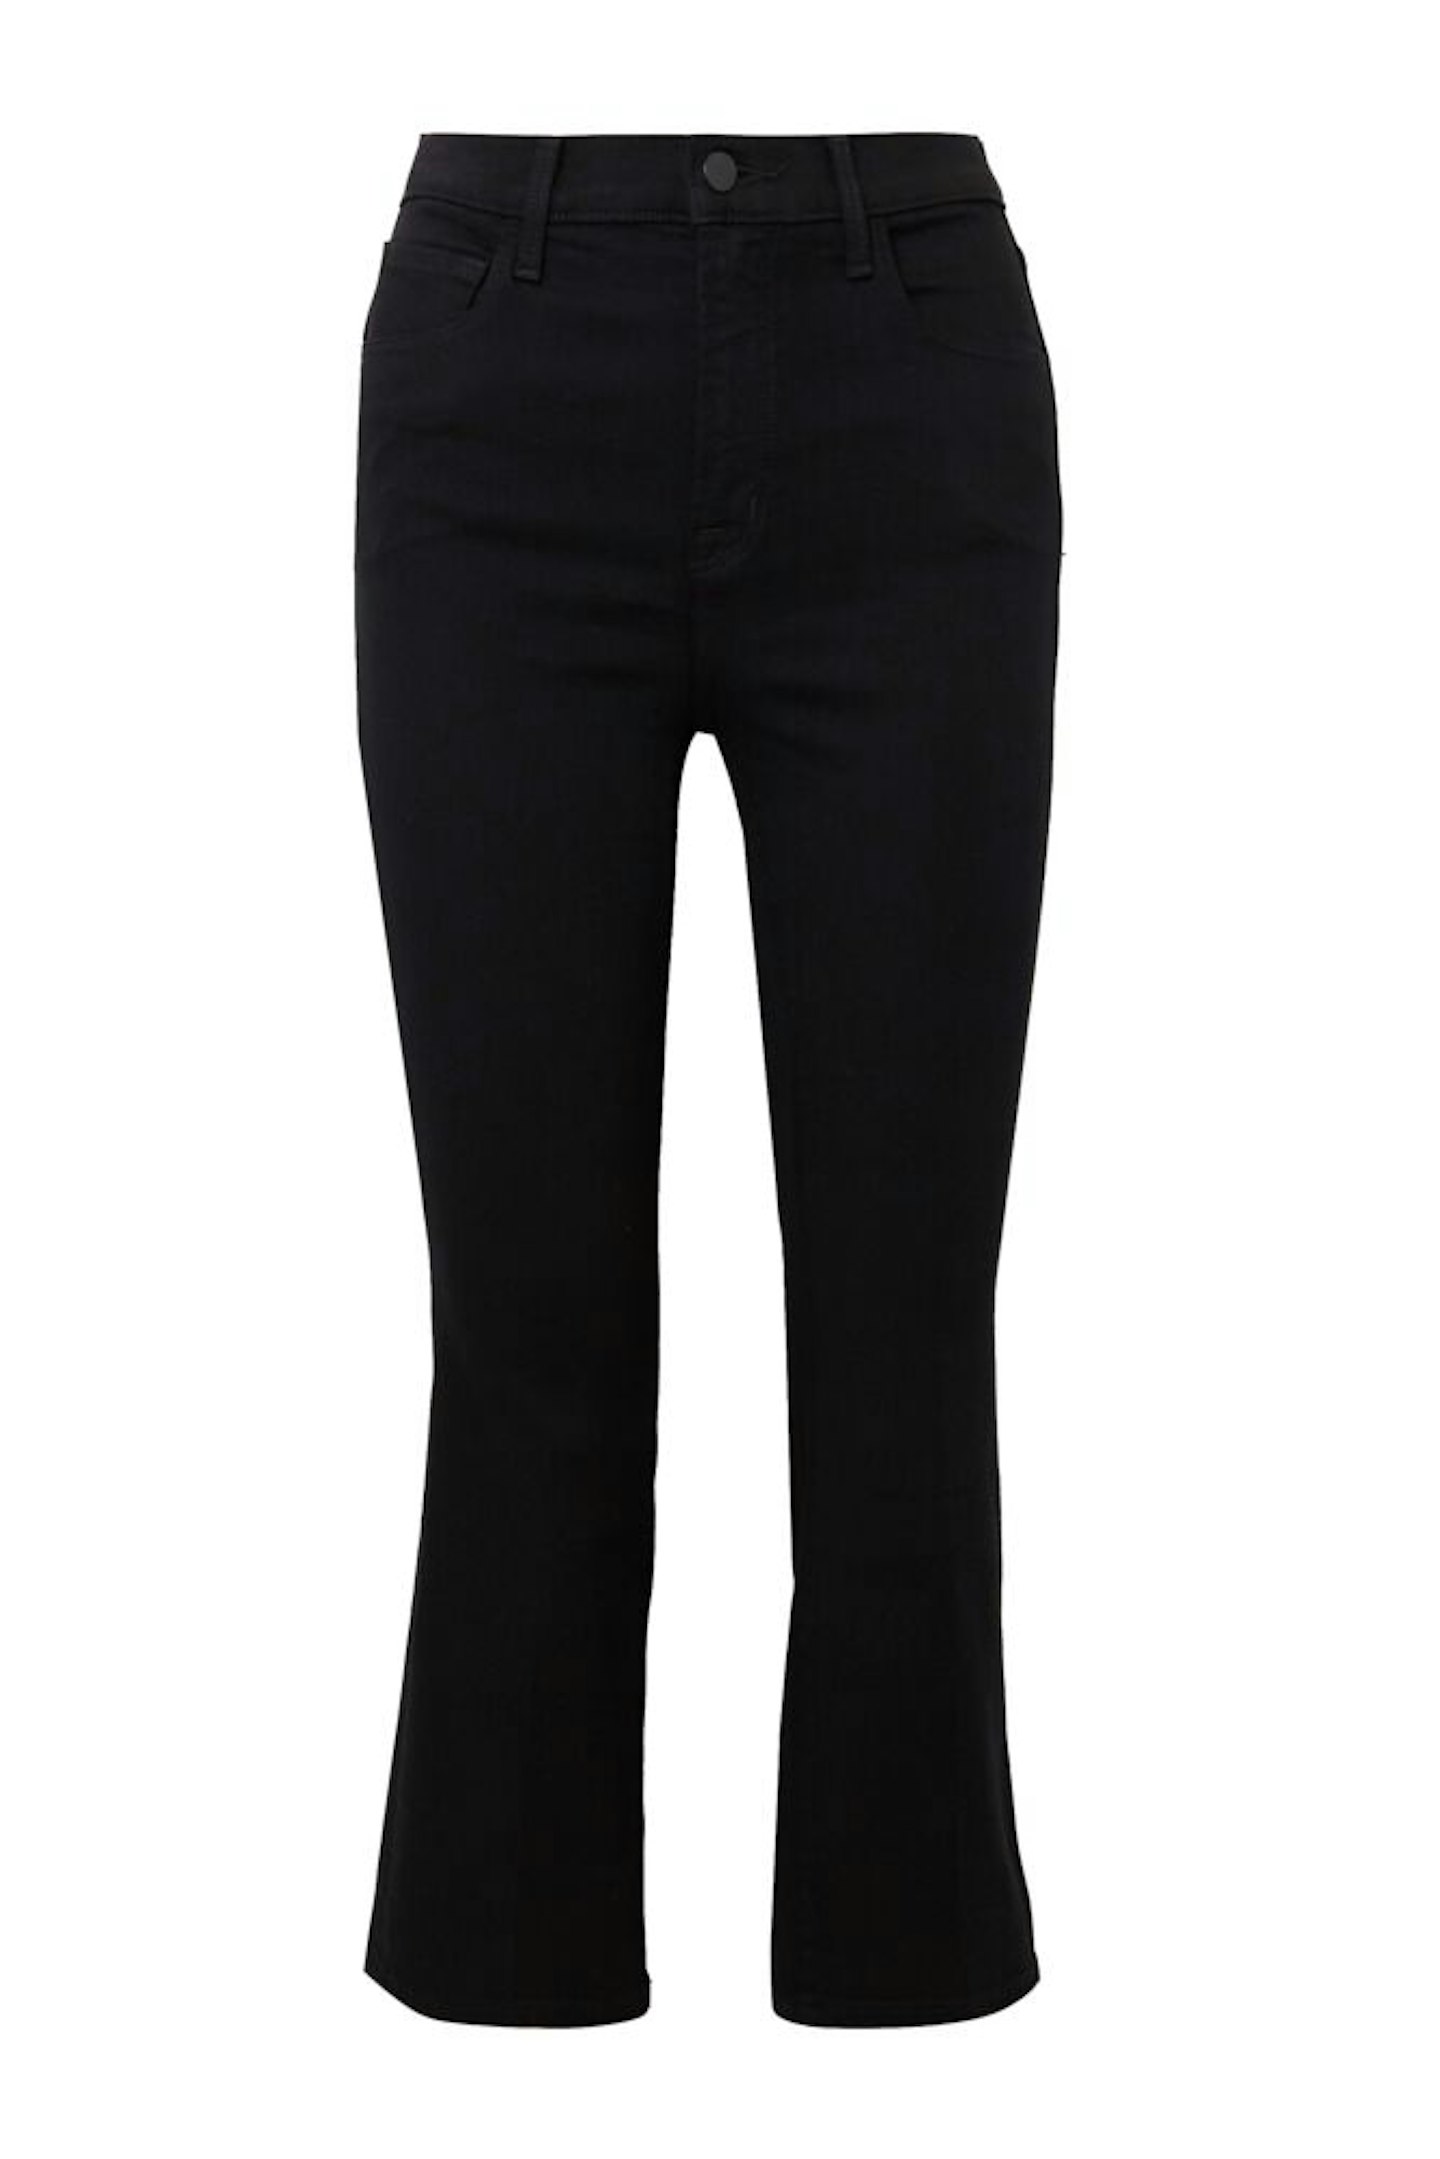 J Brand, Franky Cropped High-Rise Boot-Cut Jeans, £225